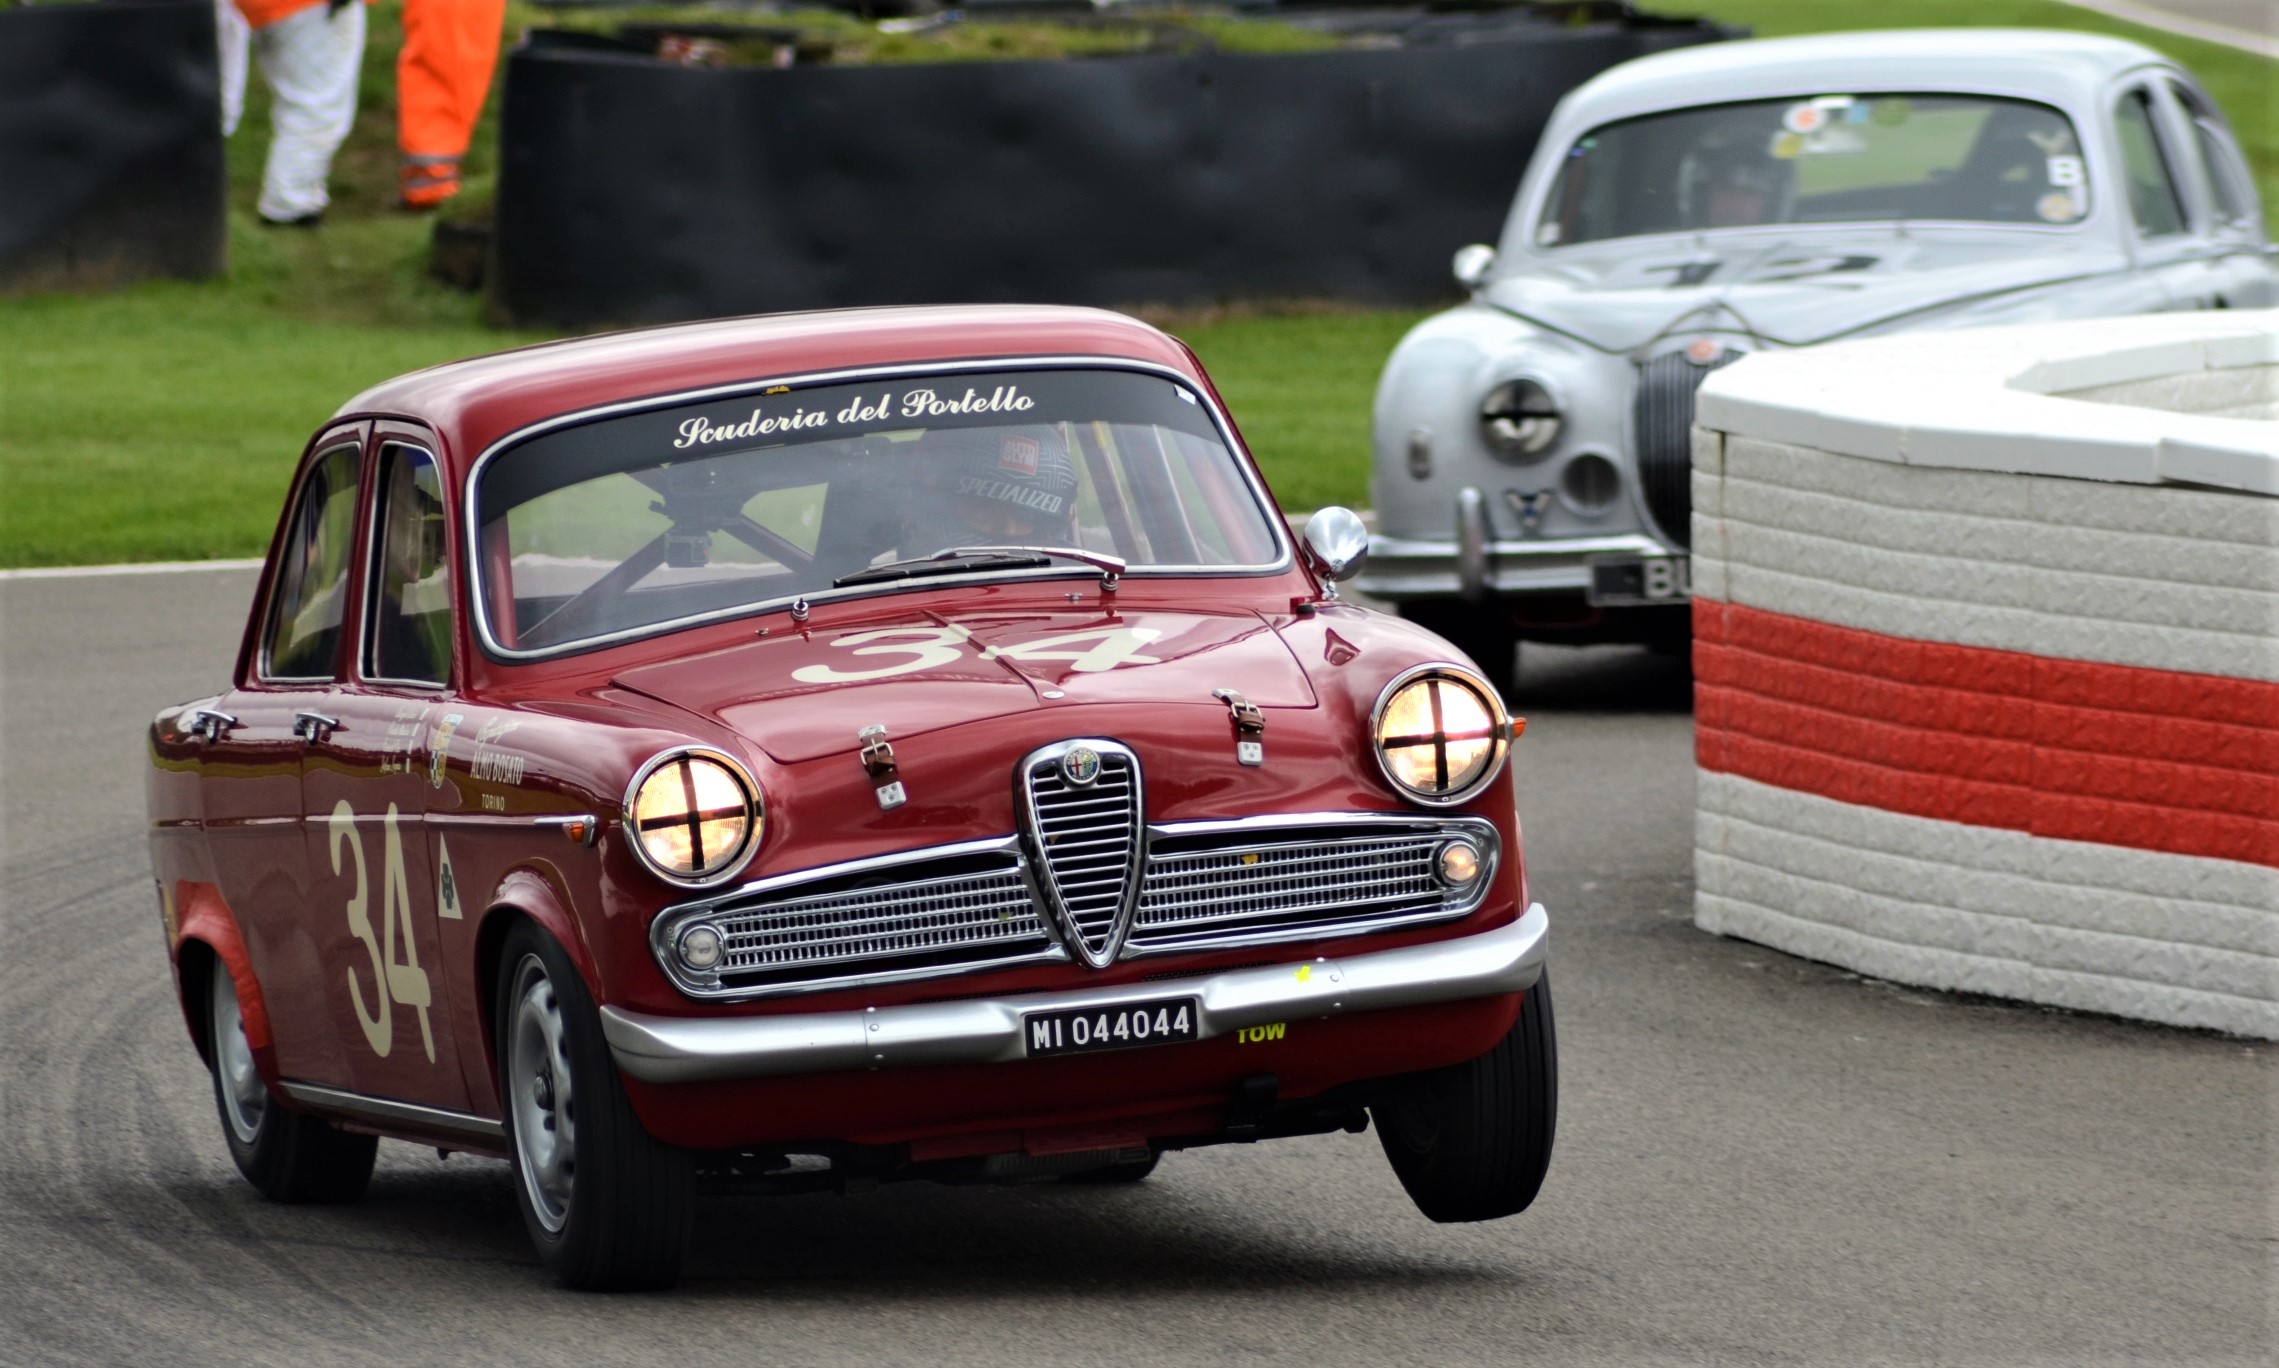 The 2017 Goodwood Revival